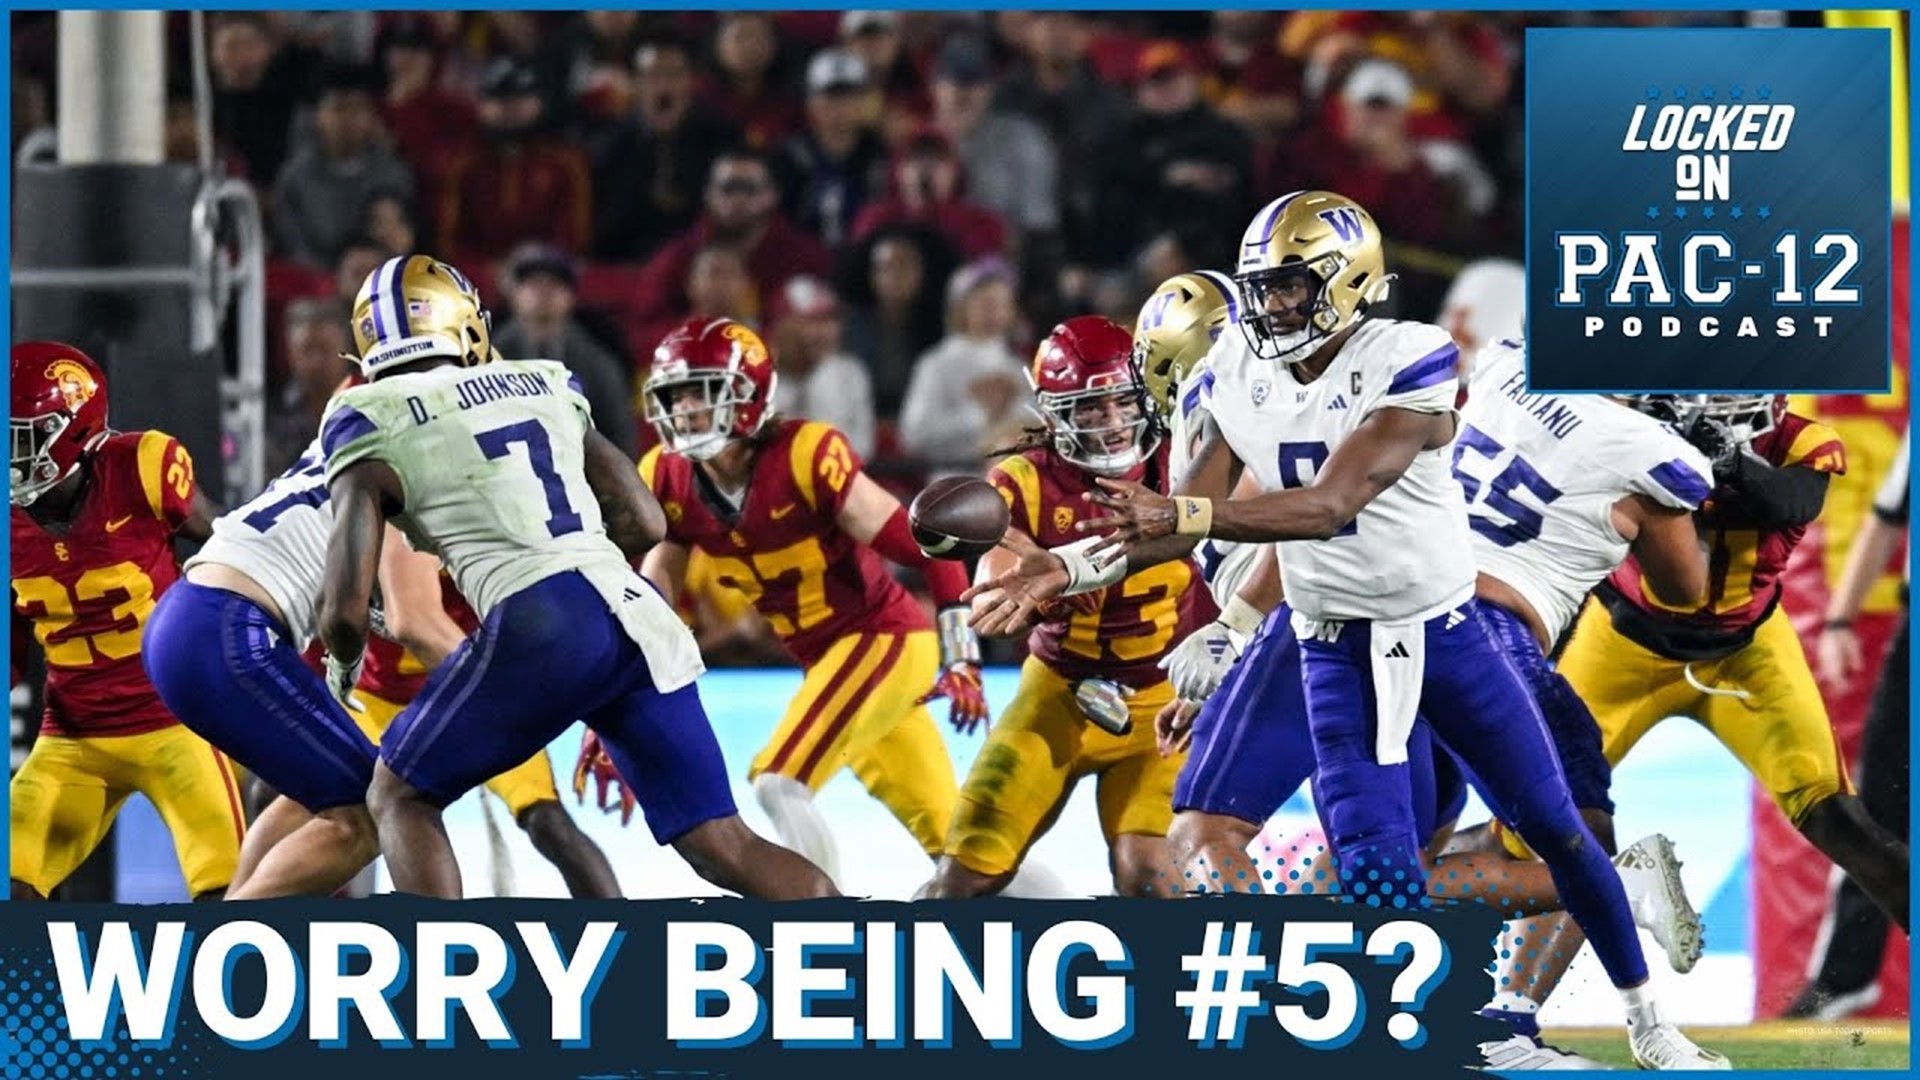 Washington remained unbeaten with a high-profile win over USC last week 52-42 in Los Angeles. They were not rewarded for it, as they are still behind Florida State